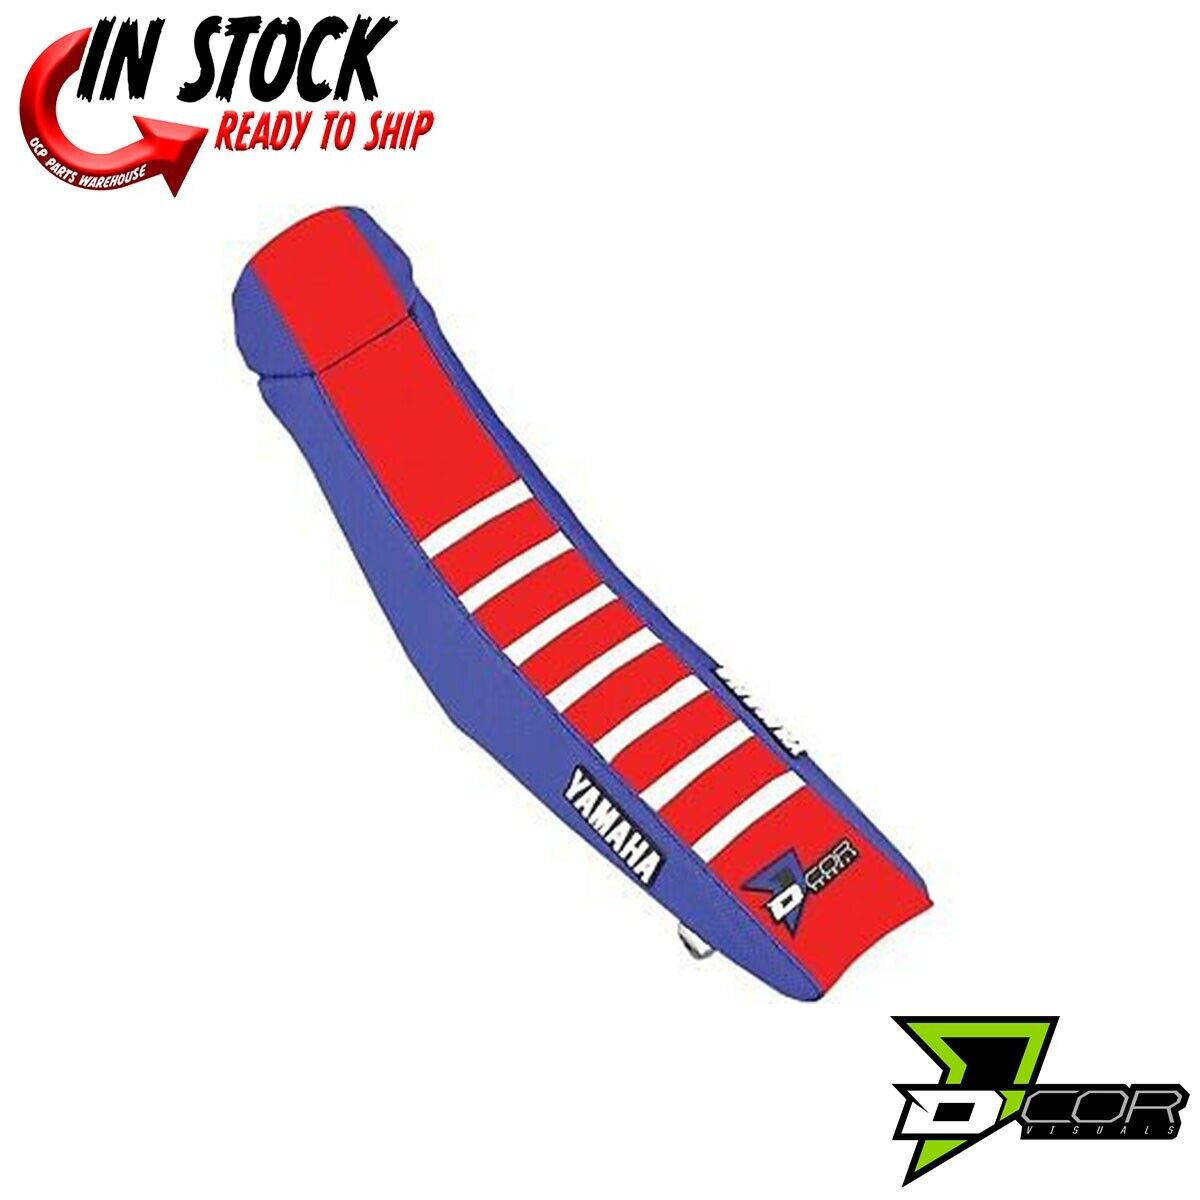 D'COR Seat Cover Blue/Red, White Ribs Yamaha YZ250F 14-18 YZ450F 14-17